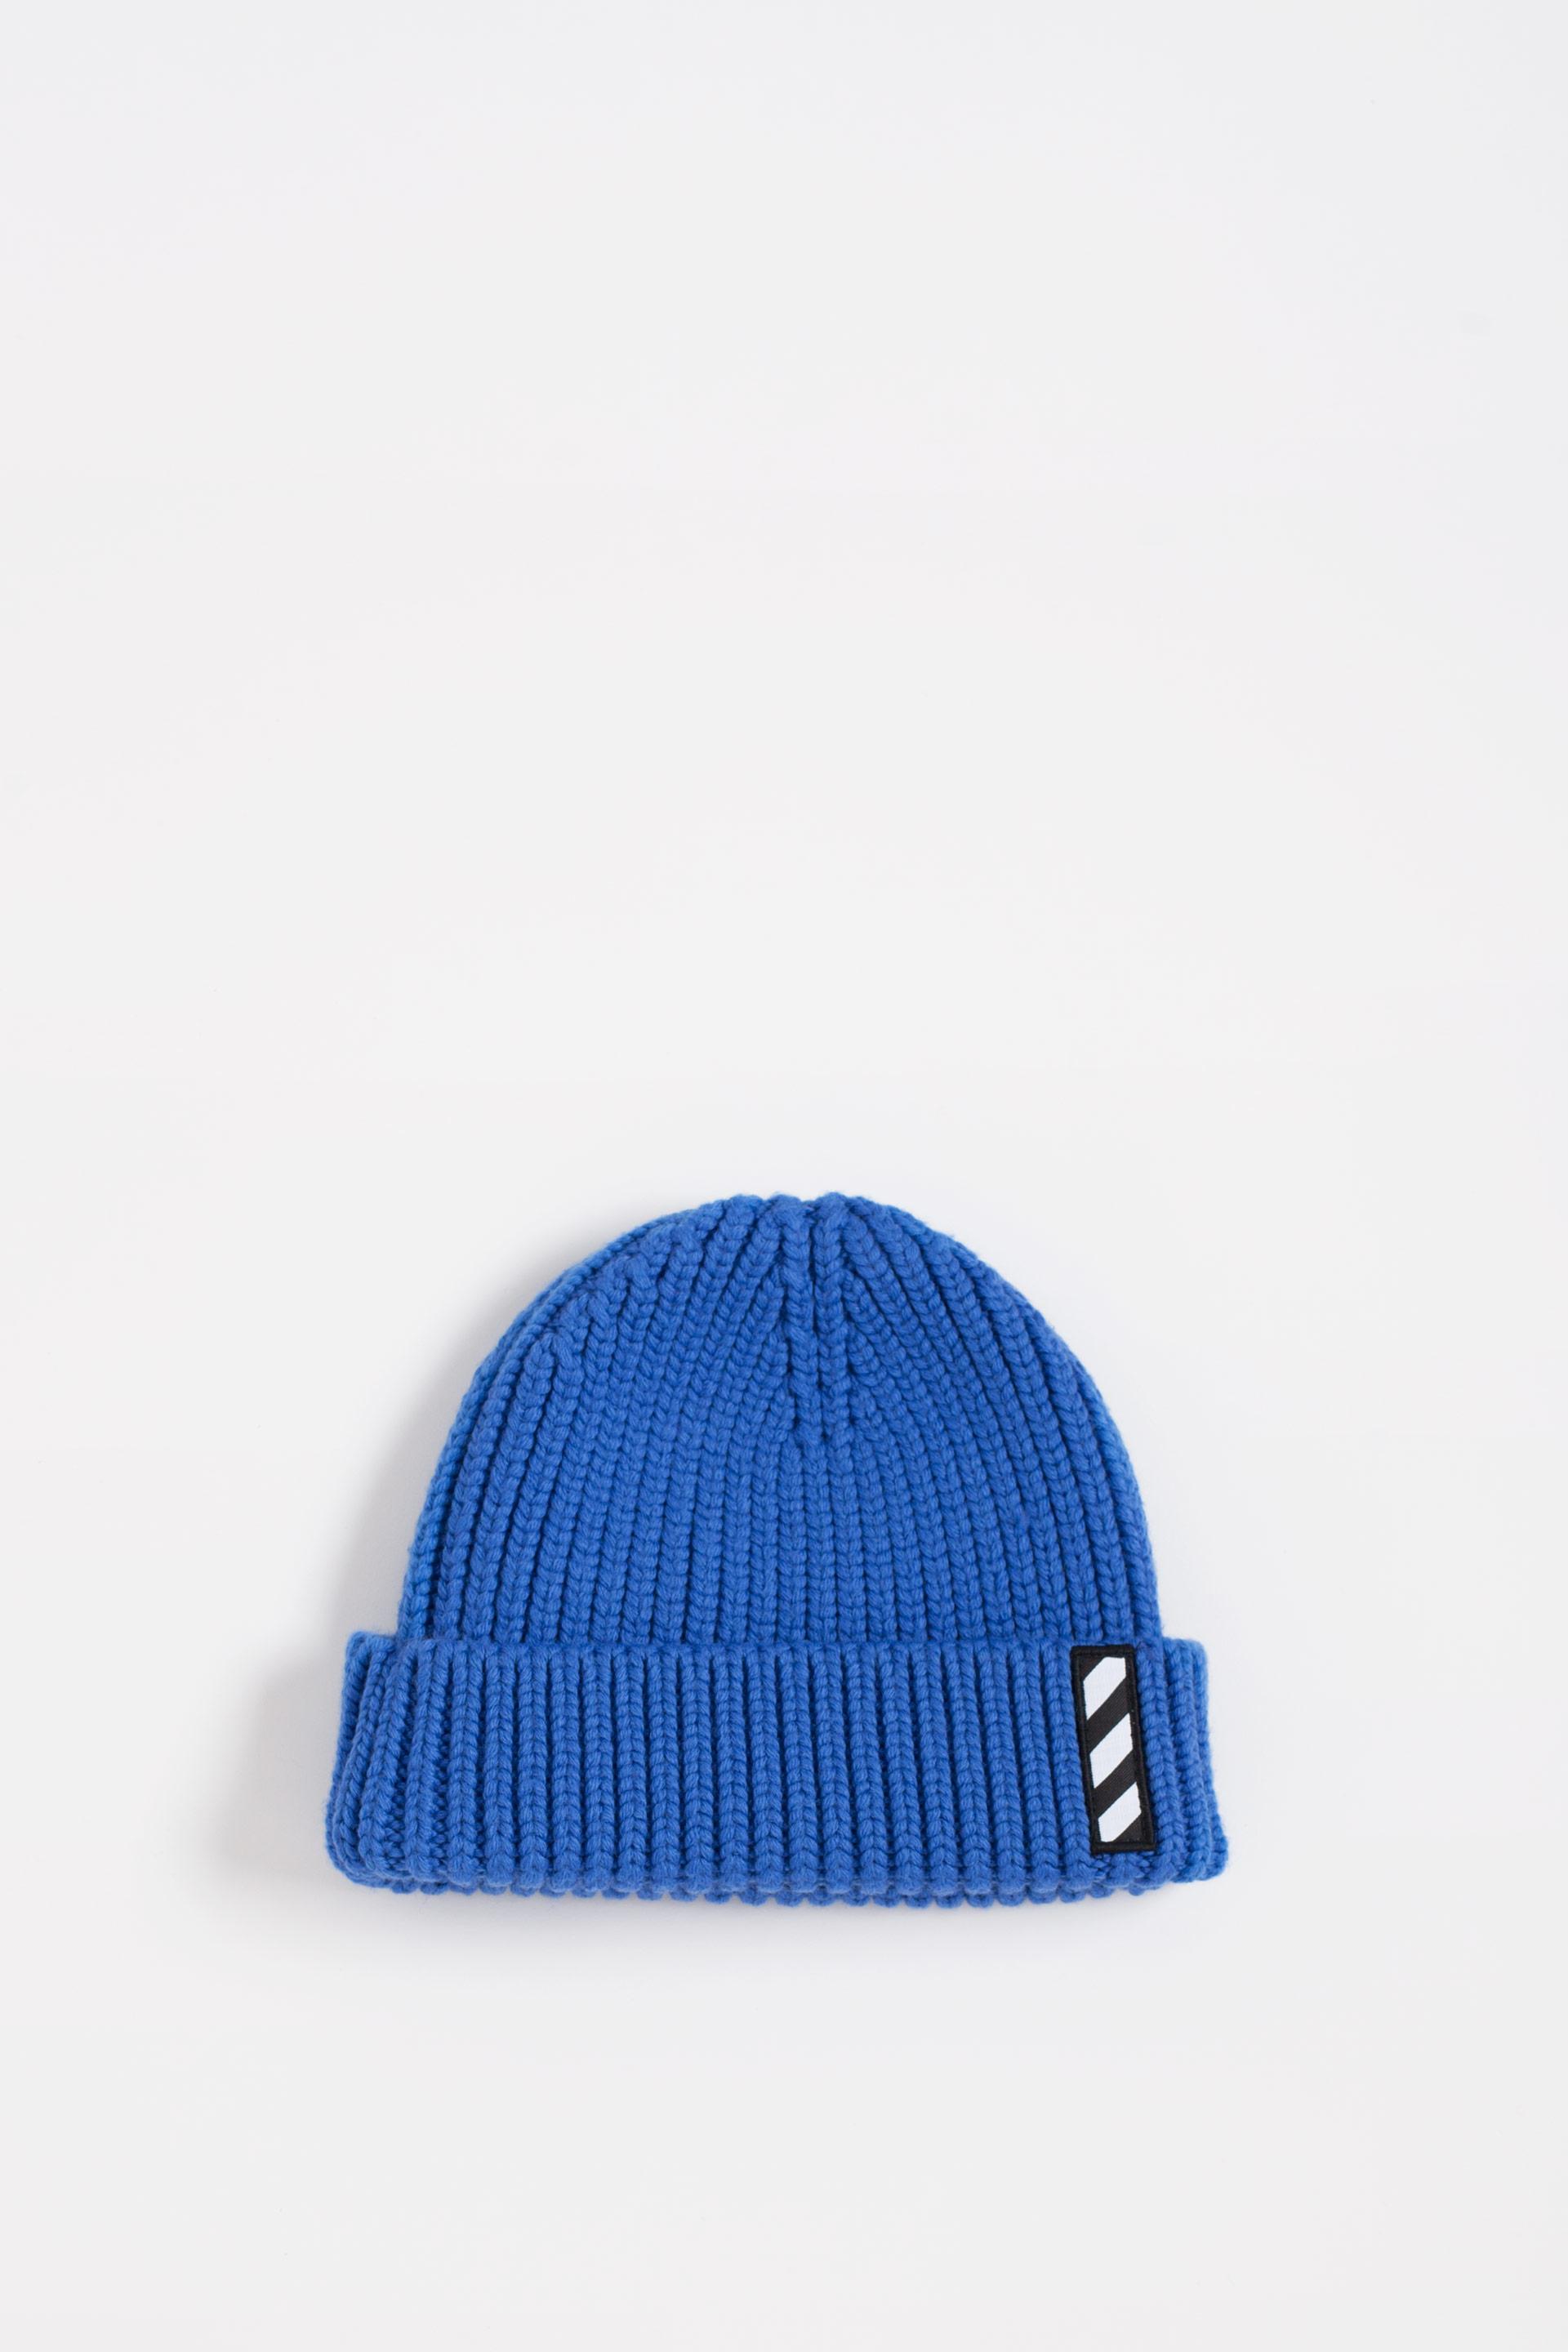 Off-White c/o Virgil Abloh Wool Patch Beanie in Blue for Men - Lyst